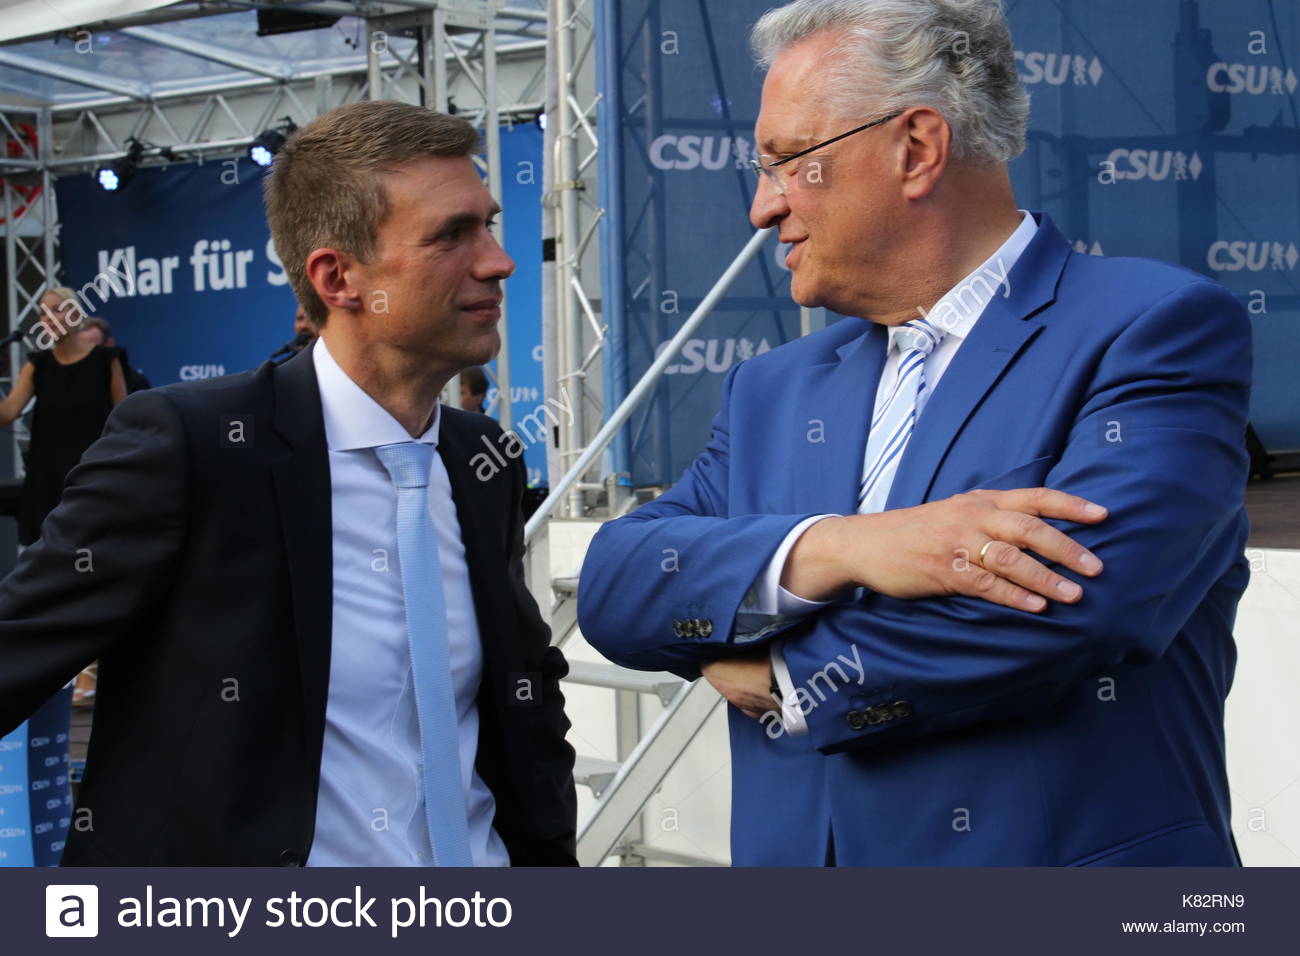 CSU politician Joachim Herrmann in conversation with MP stefan Muller at an election campaign event in Bavaria  Germany. Stock Photo